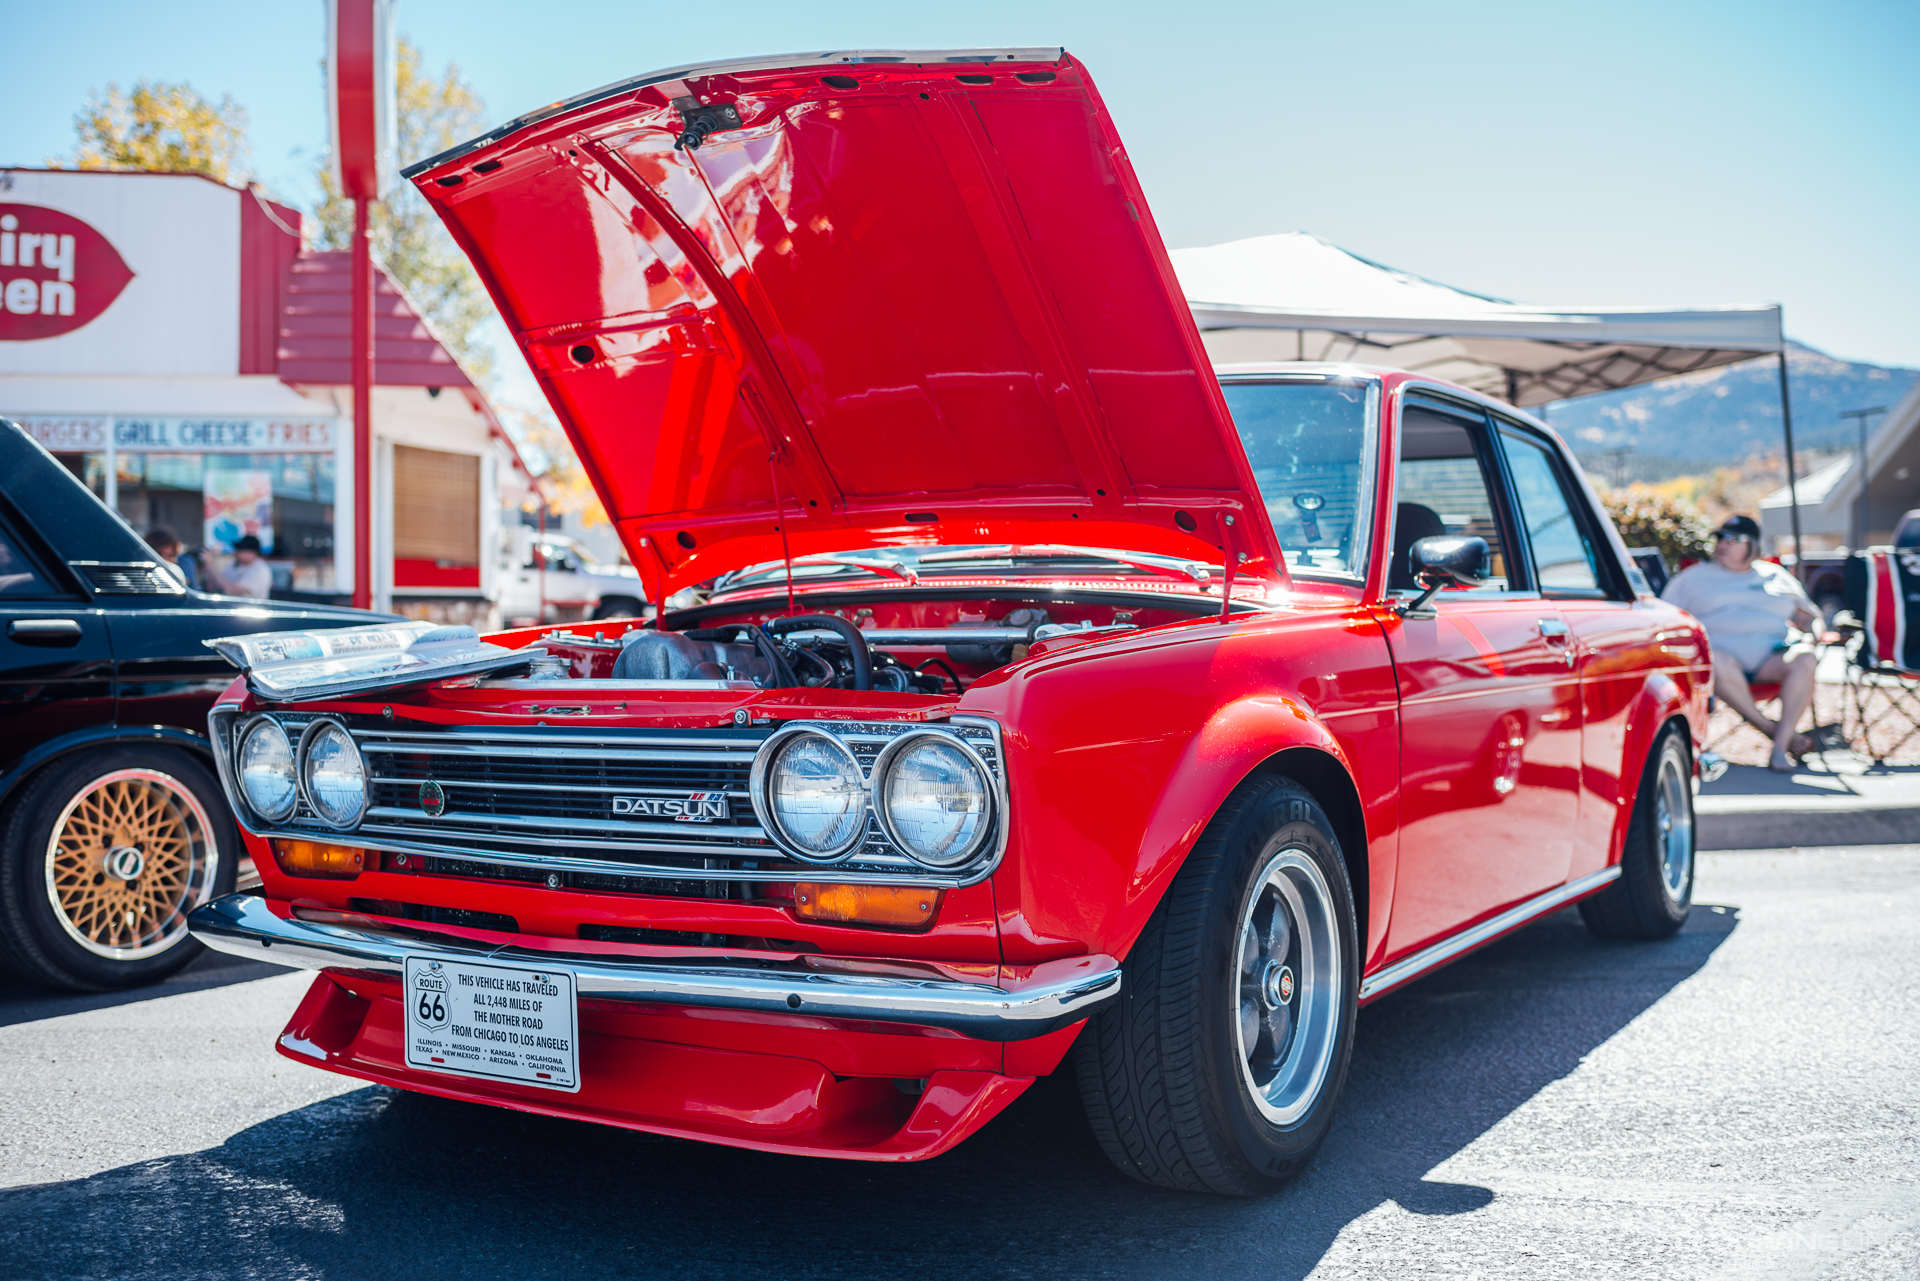 4 Standout Datsuns at the Multi-State Datsun Classic Meet.